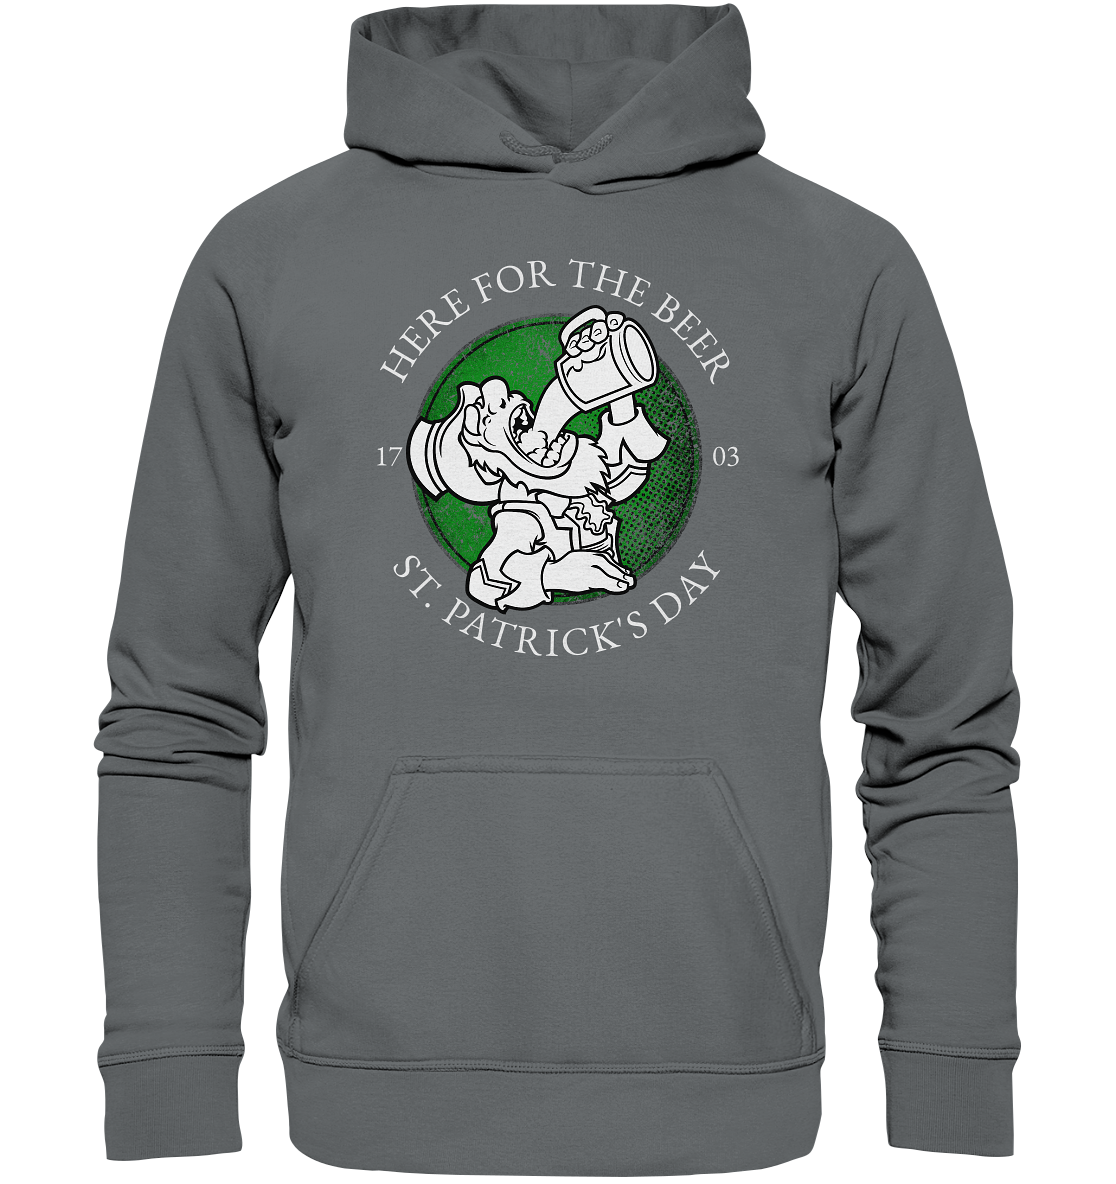 Here For The Beer "St. Patrick's Day" - Basic Unisex Hoodie